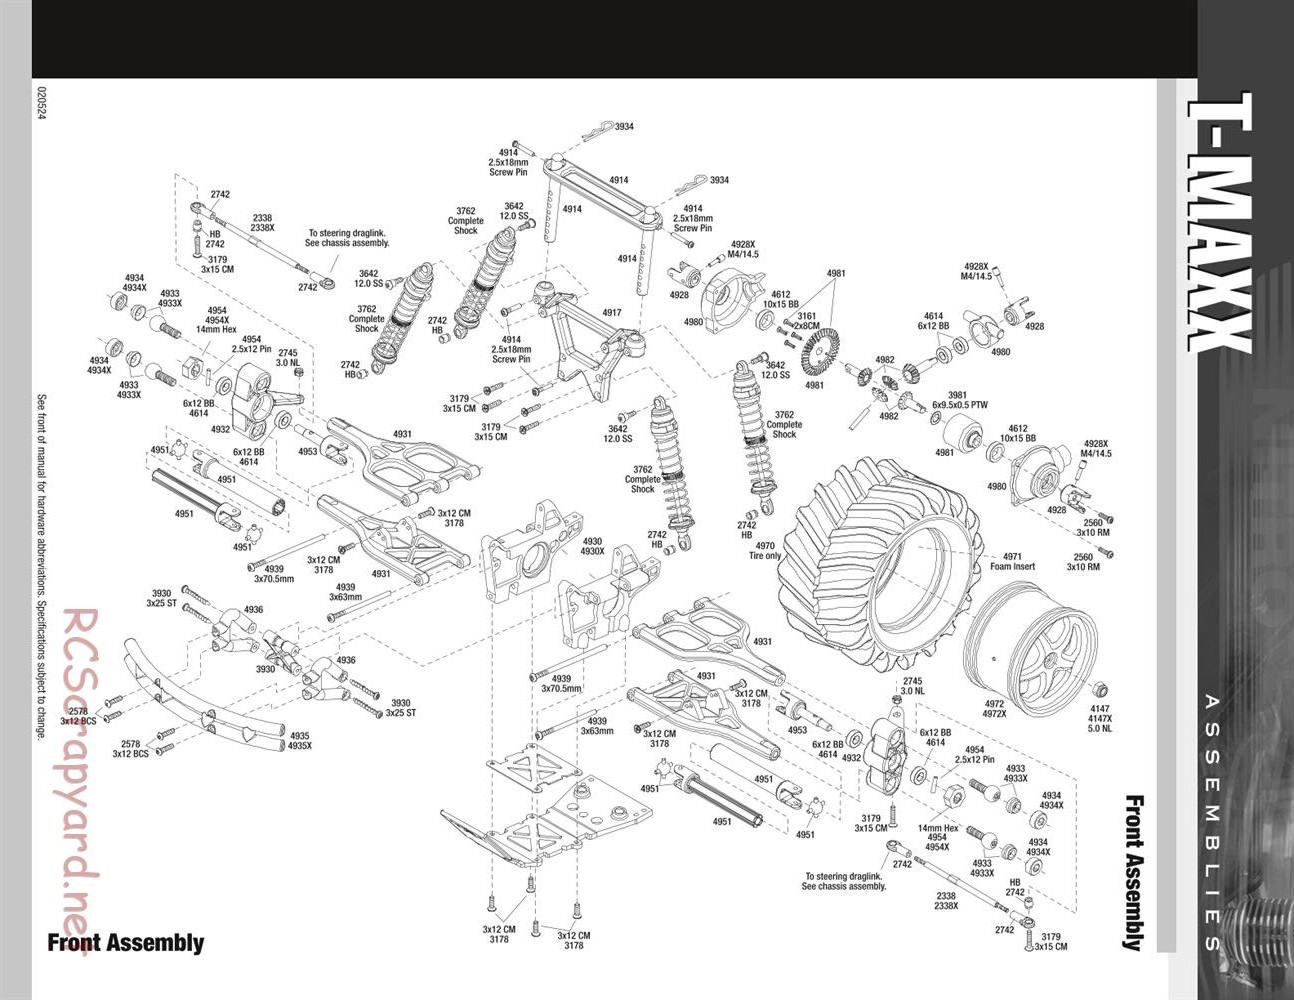 Traxxas - T-Maxx (1999) - Exploded Views - Page 2